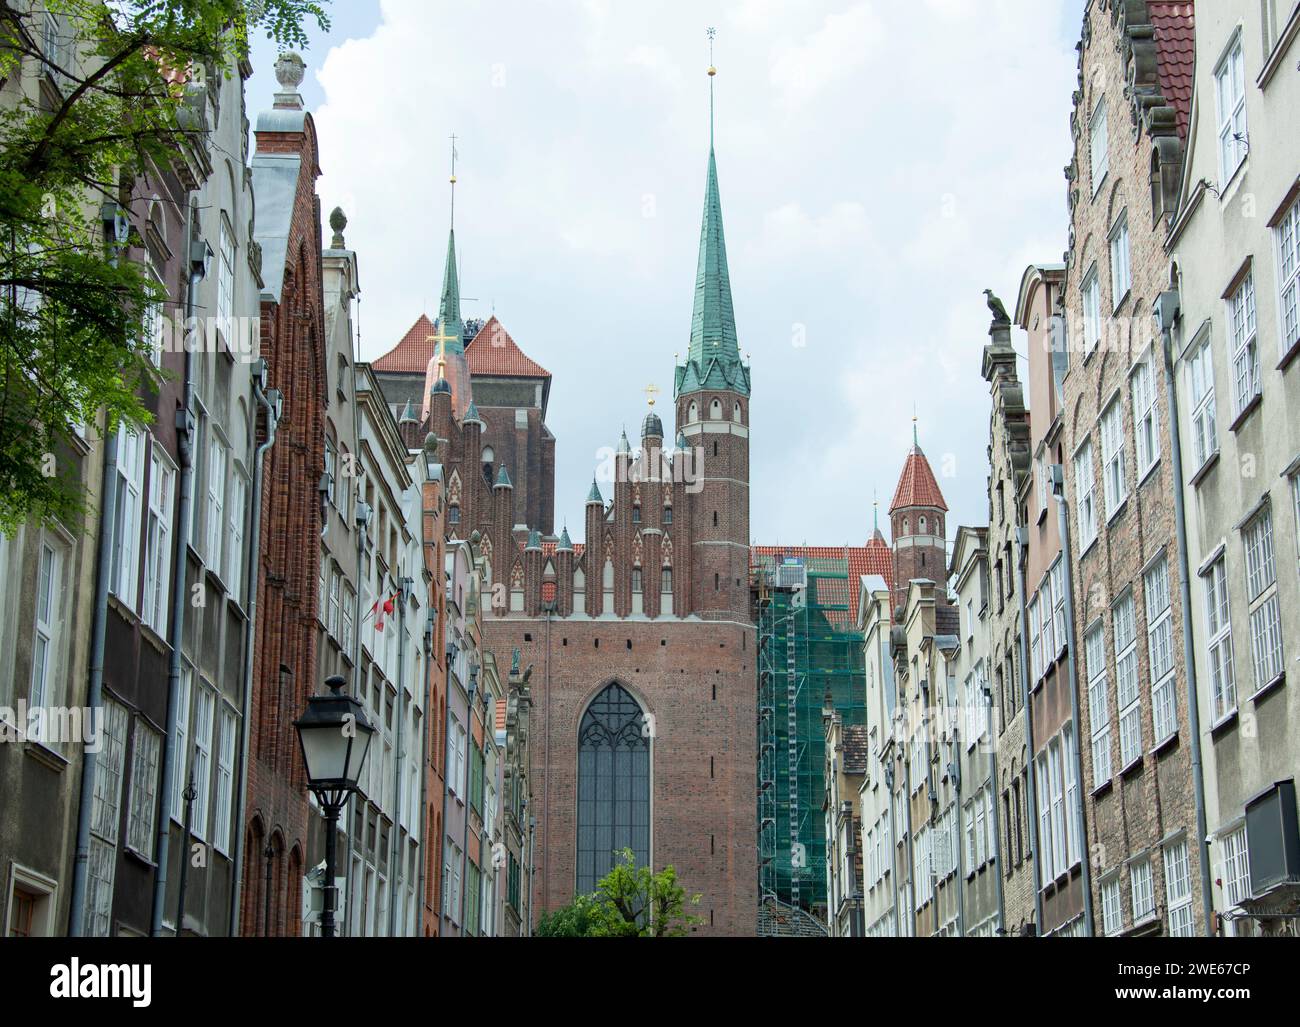 The view of Gdansk old town houses and the part of 16th century St. Mary's Catholic Church (Poland). Stock Photo